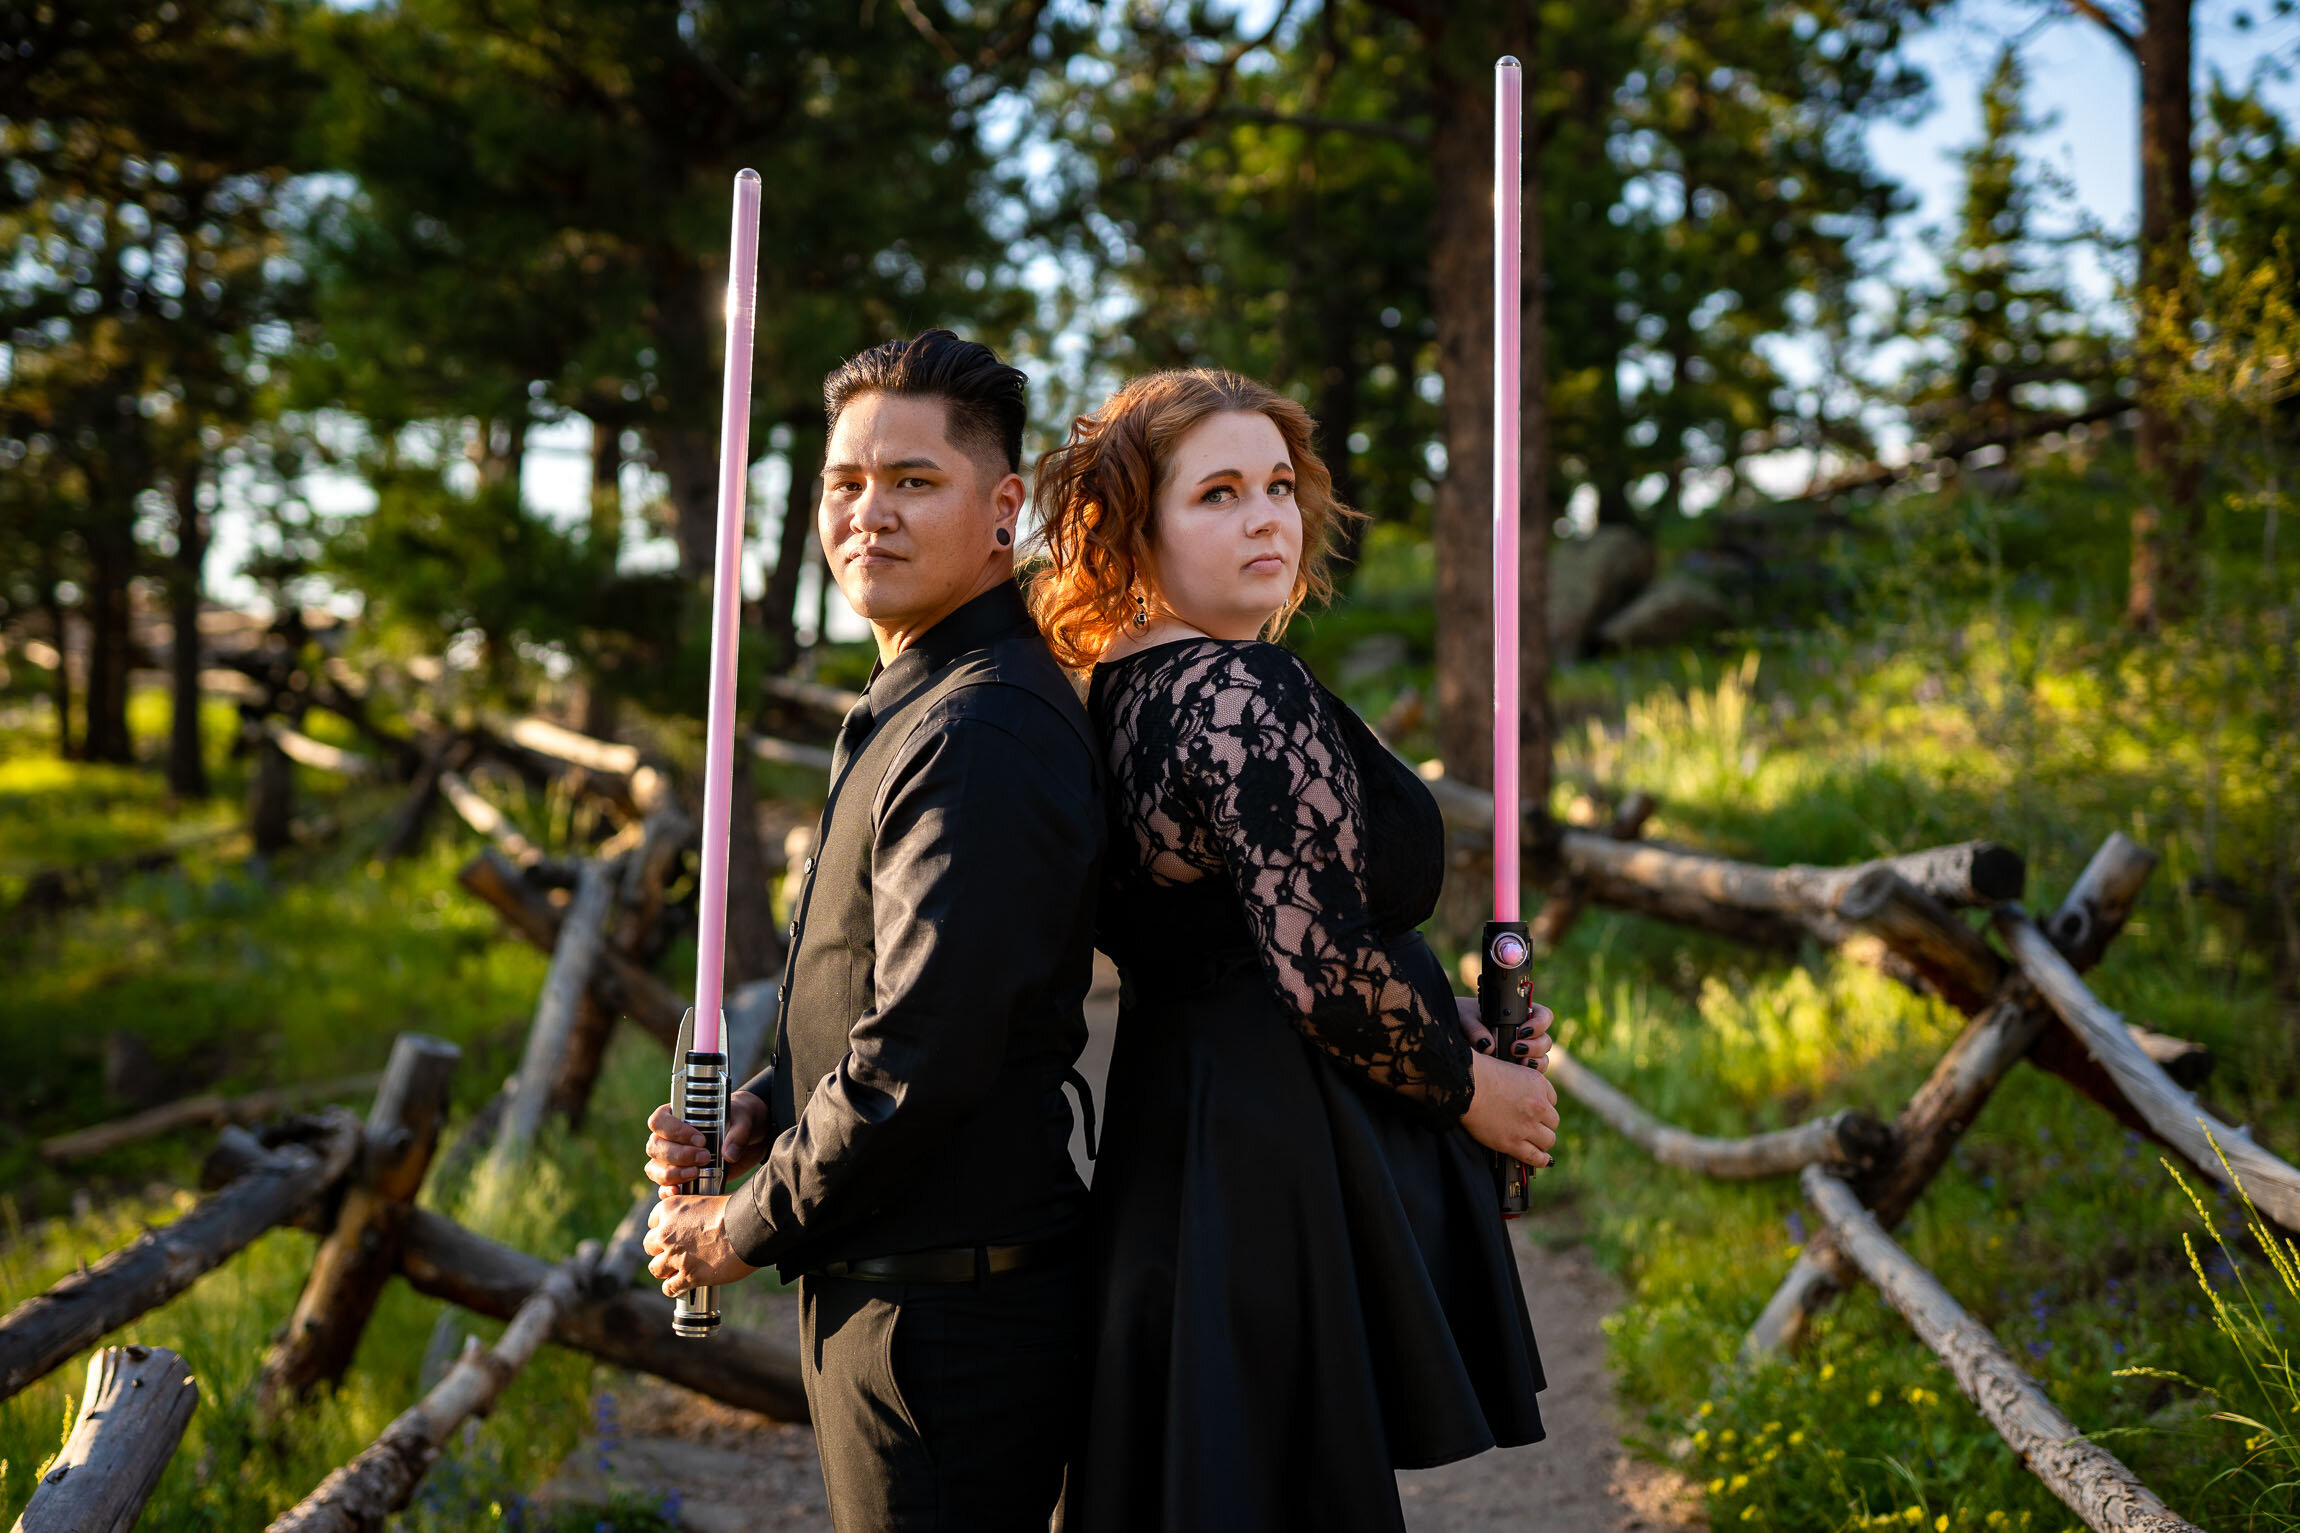 Engaged couple pose for a portrait with their light sabers in the forest during golden hour, Engagement Session, Engagement Photos, Engagement Photos Inspiration, Engagement Photography, Engagement Photographer, Summer Engagement Photos, Mountain Engagement Photos, Lost Gulch Overlook engagement session, Lost Gulch Overlook engagement photos, Lost Gulch Overlook engagement photography, Lost Gulch Overlook engagement photographer, Lost Gulch Overlook  engagement inspiration, Boulder engagement session, Boulder engagement photos, Boulder engagement photography, Boulder engagement photographer, Boulder engagement inspiration, Colorado engagement session, Colorado engagement photos, Colorado engagement photography, Colorado engagement photographer, Colorado engagement inspiration